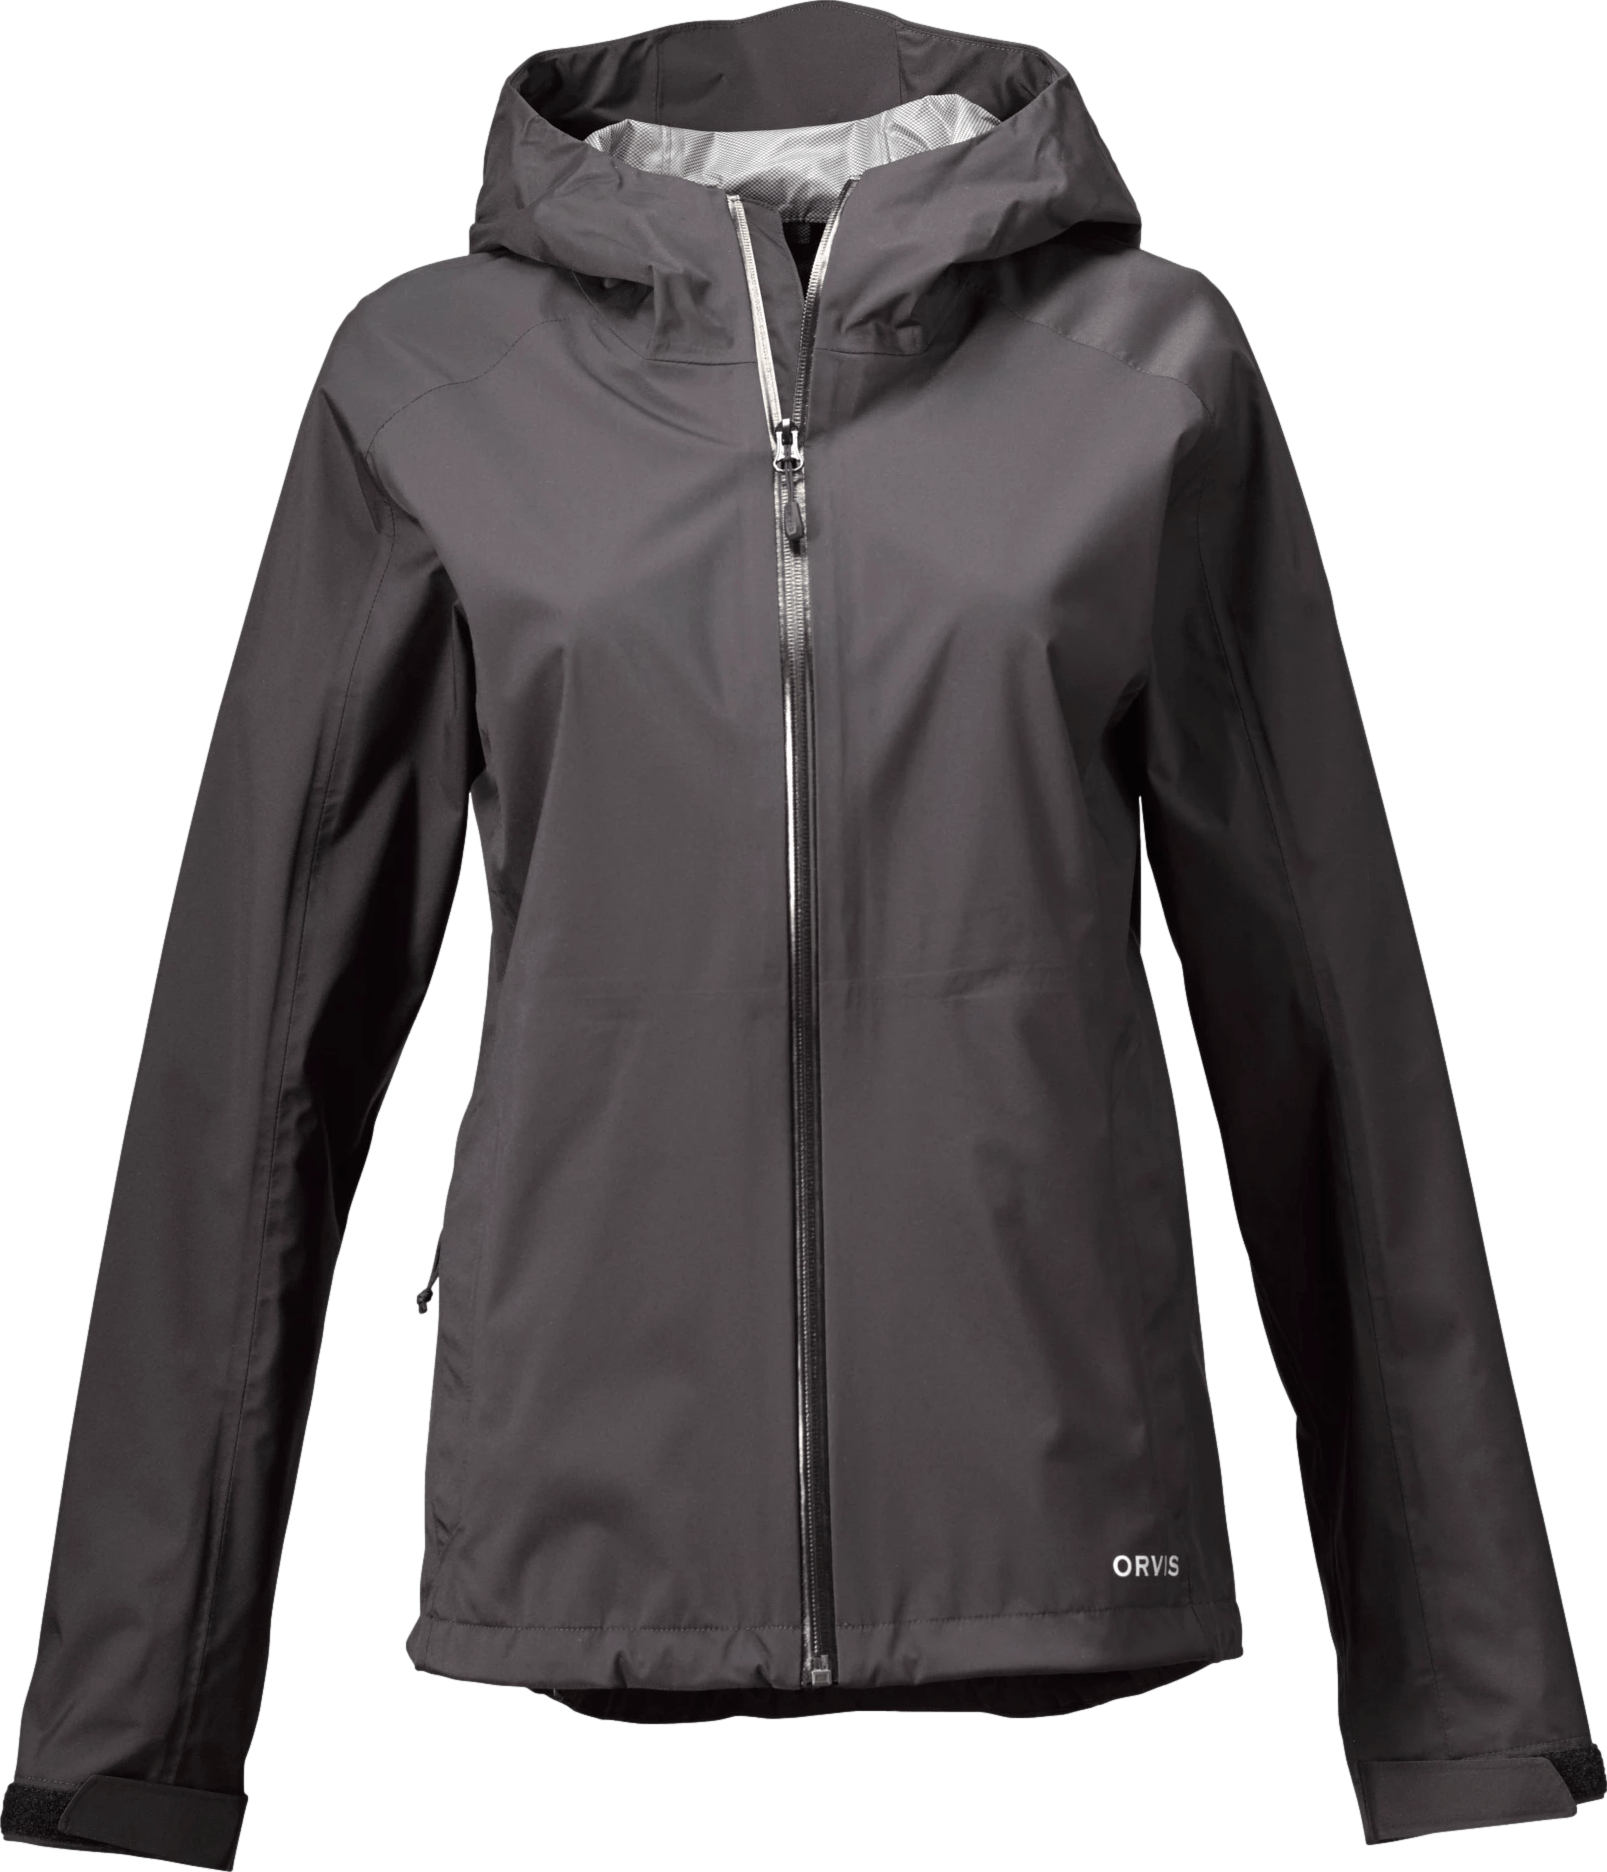 Orvis Fishing Jackets: Encounter, Clearwater, UltraLight Wading Jackets